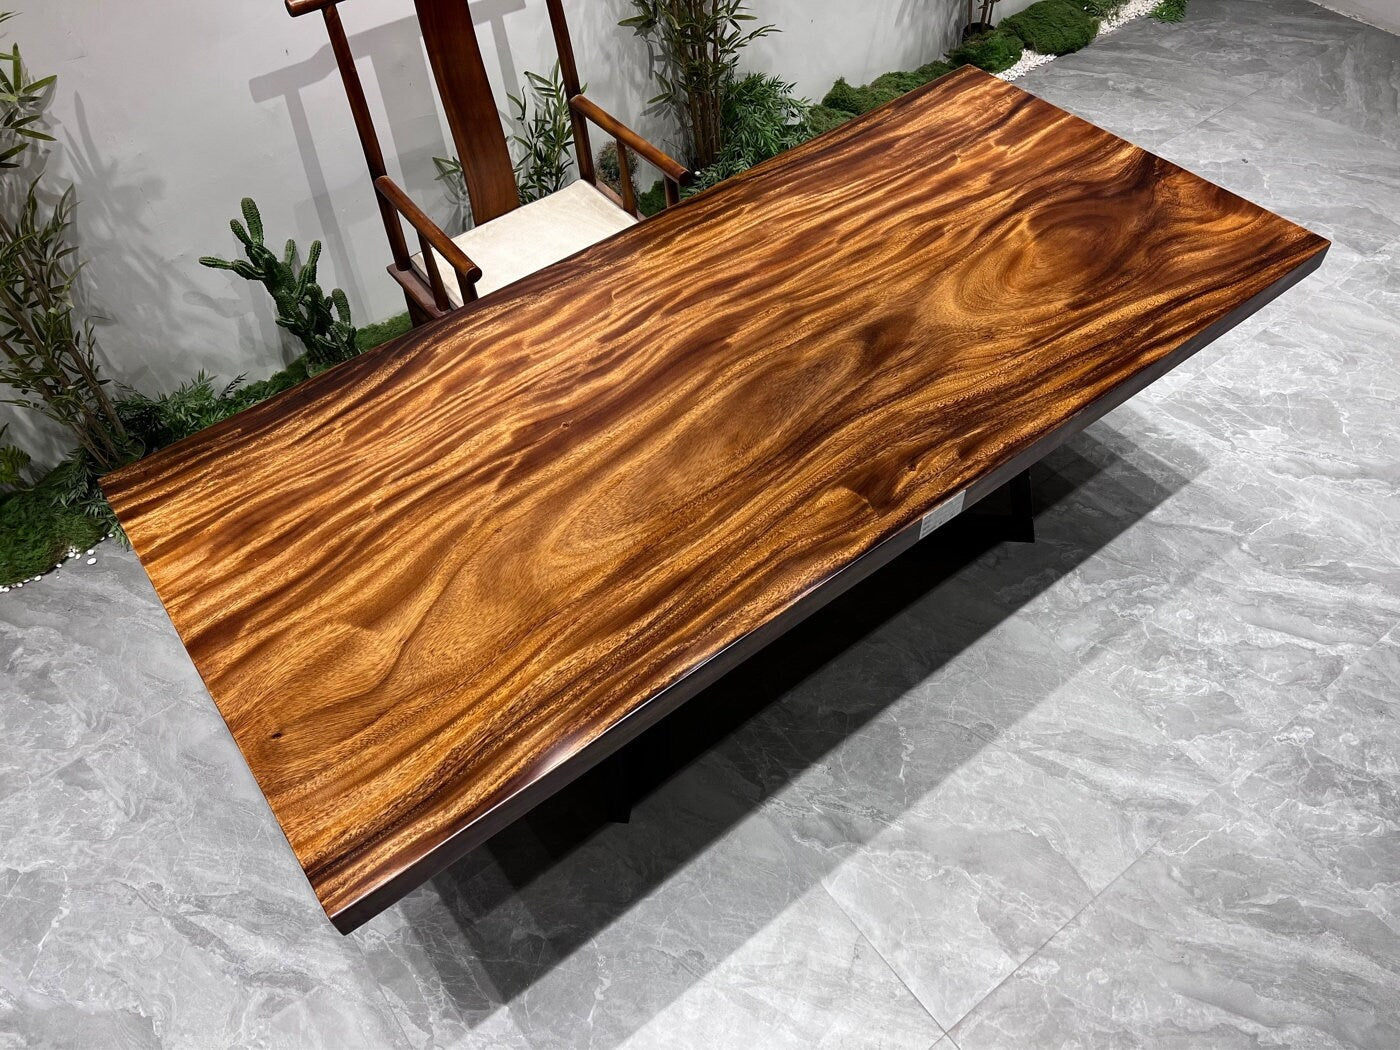 Monkey Pod Tabletop Slab, Dining Table, Log Table, Timber Table